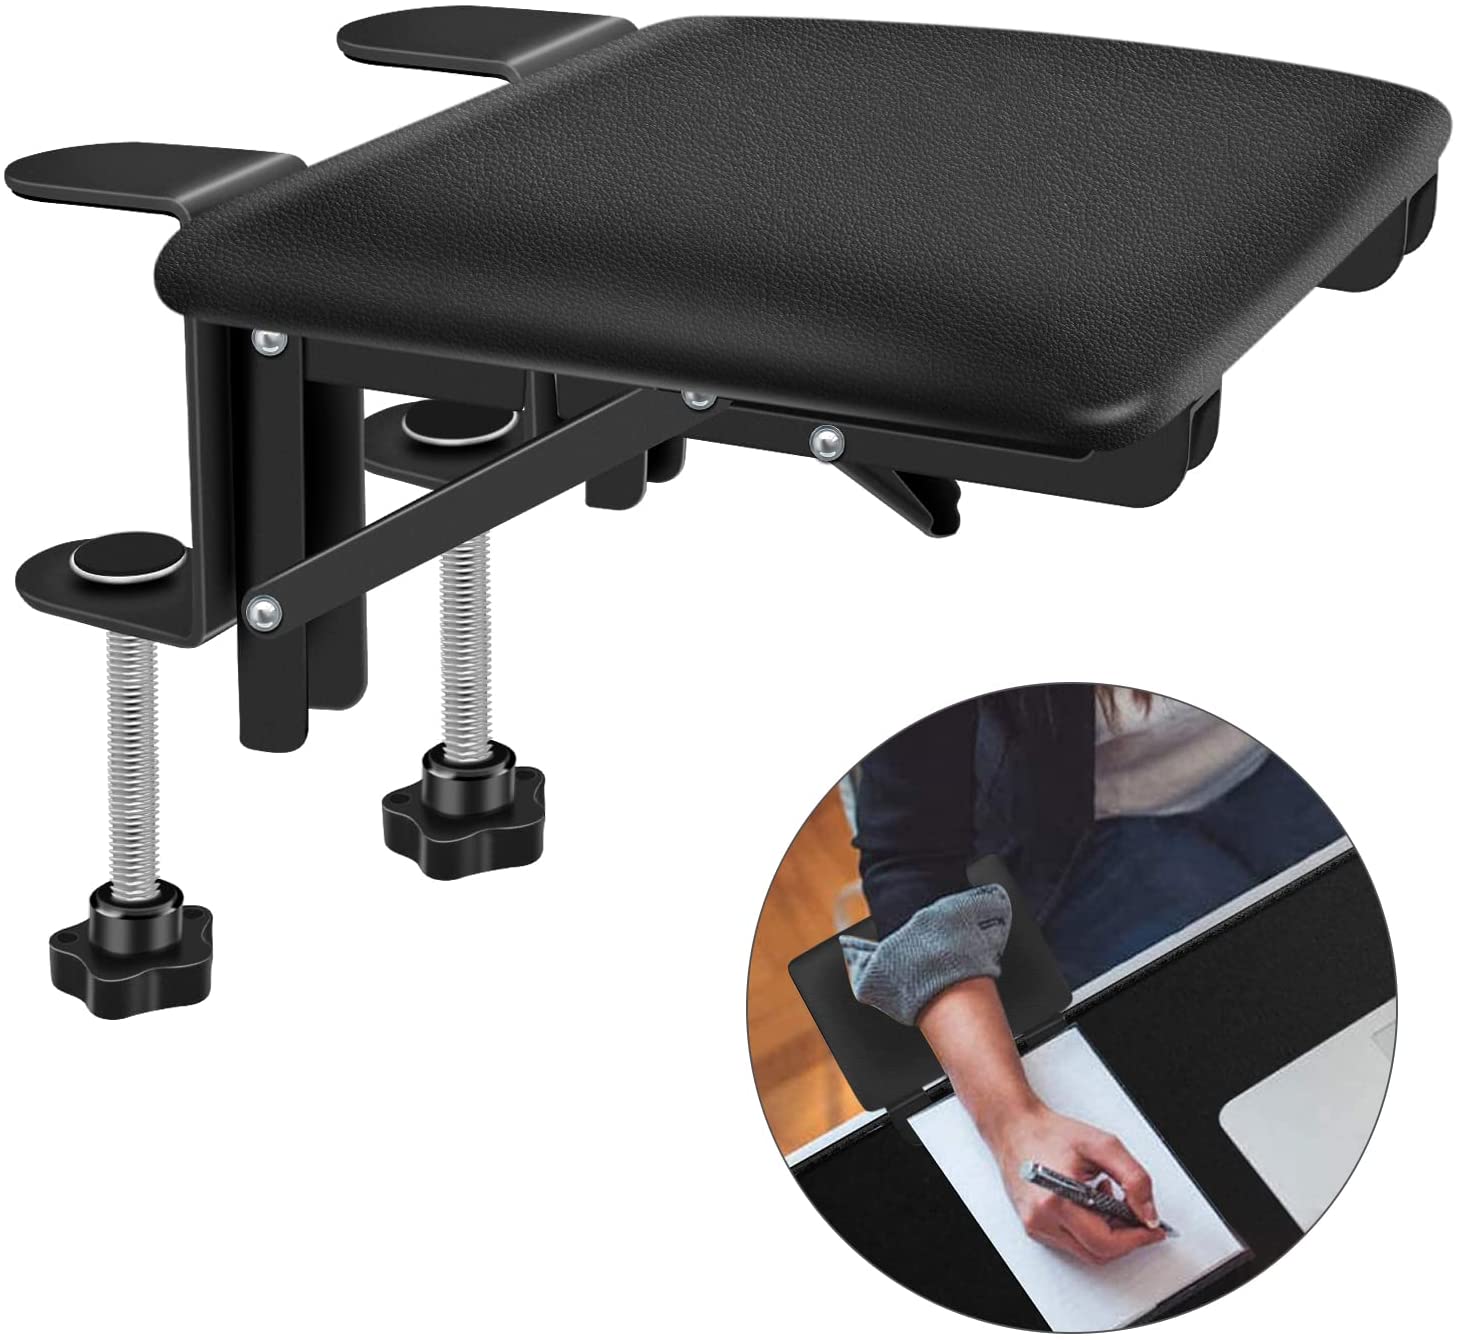 Giecy arm Rest for Desk, Adjustable Arm Rest Support for arm Support for Computer Desk Ergonomic Arm Rest Extender Rotating Mouse Pad Holder for Table Office Chair Desk